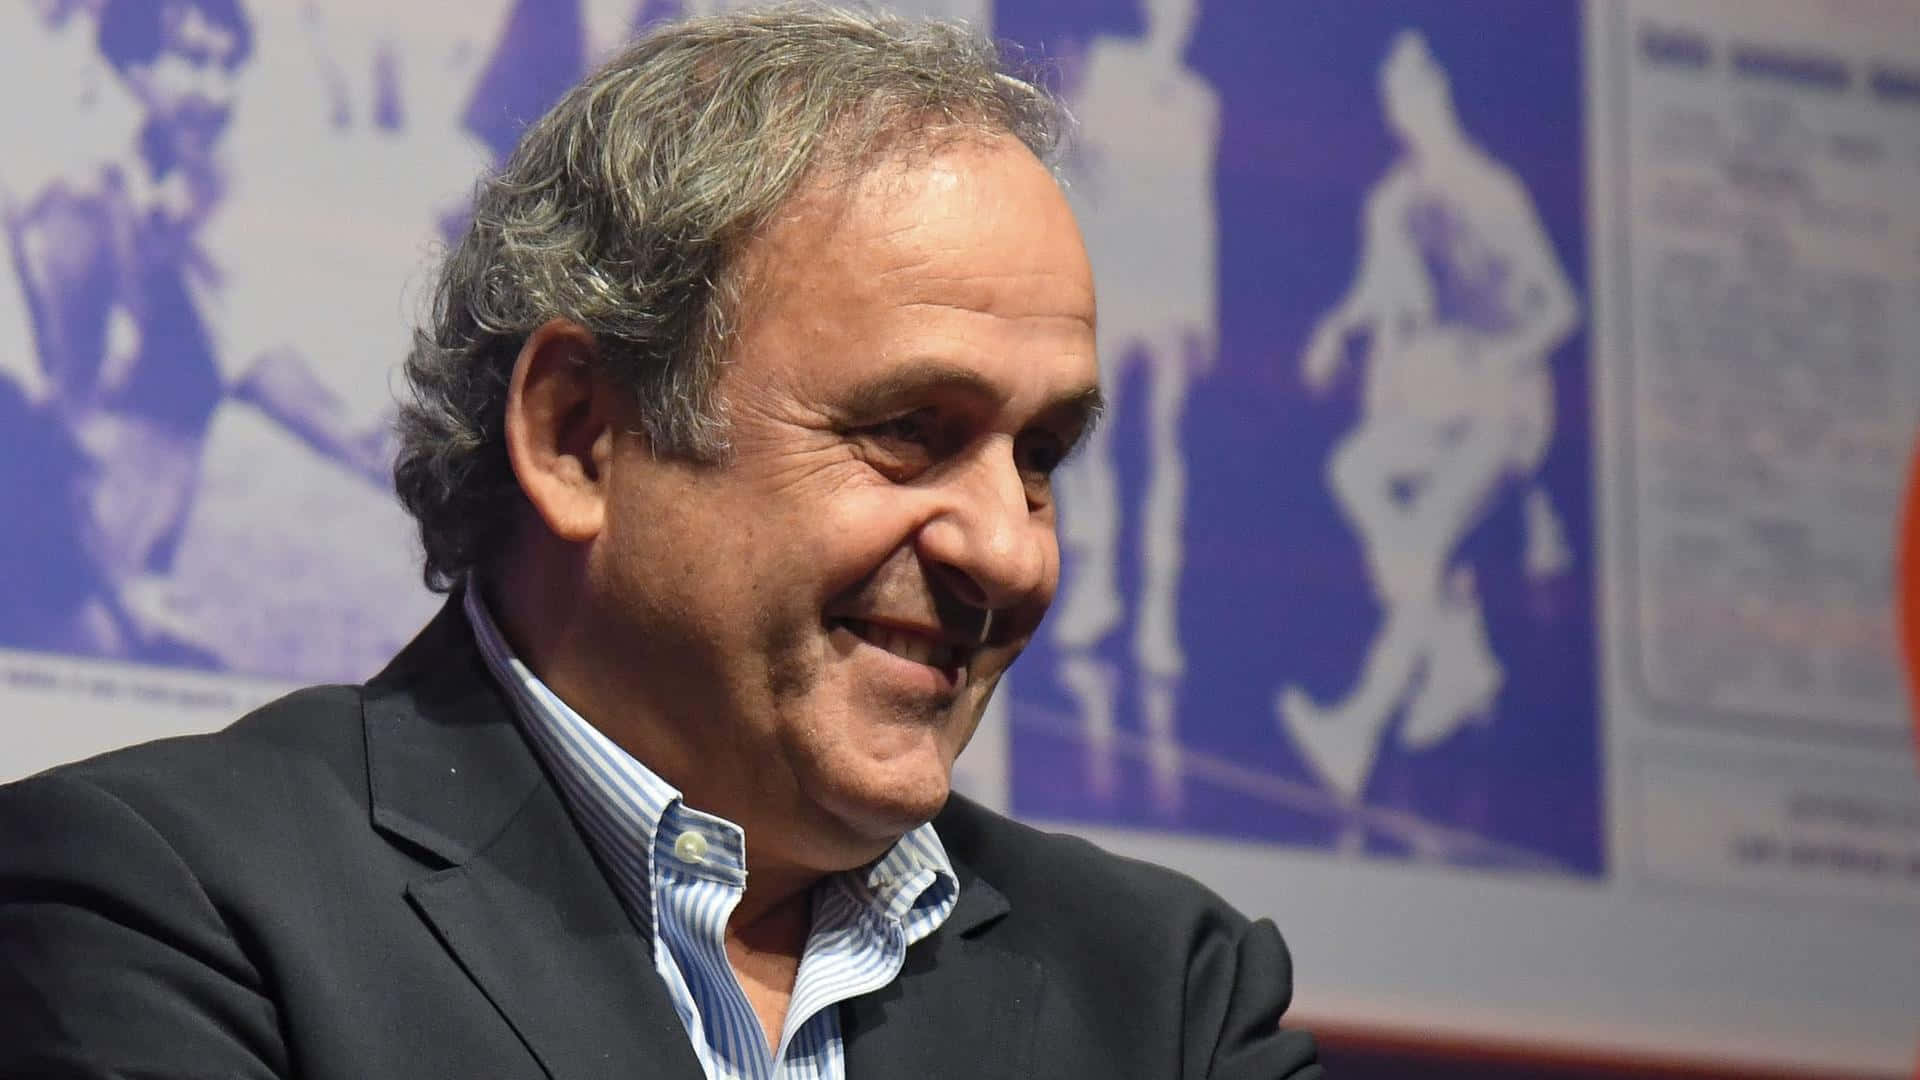 Michel Platini Interview Smiling Candid Photography Wallpaper